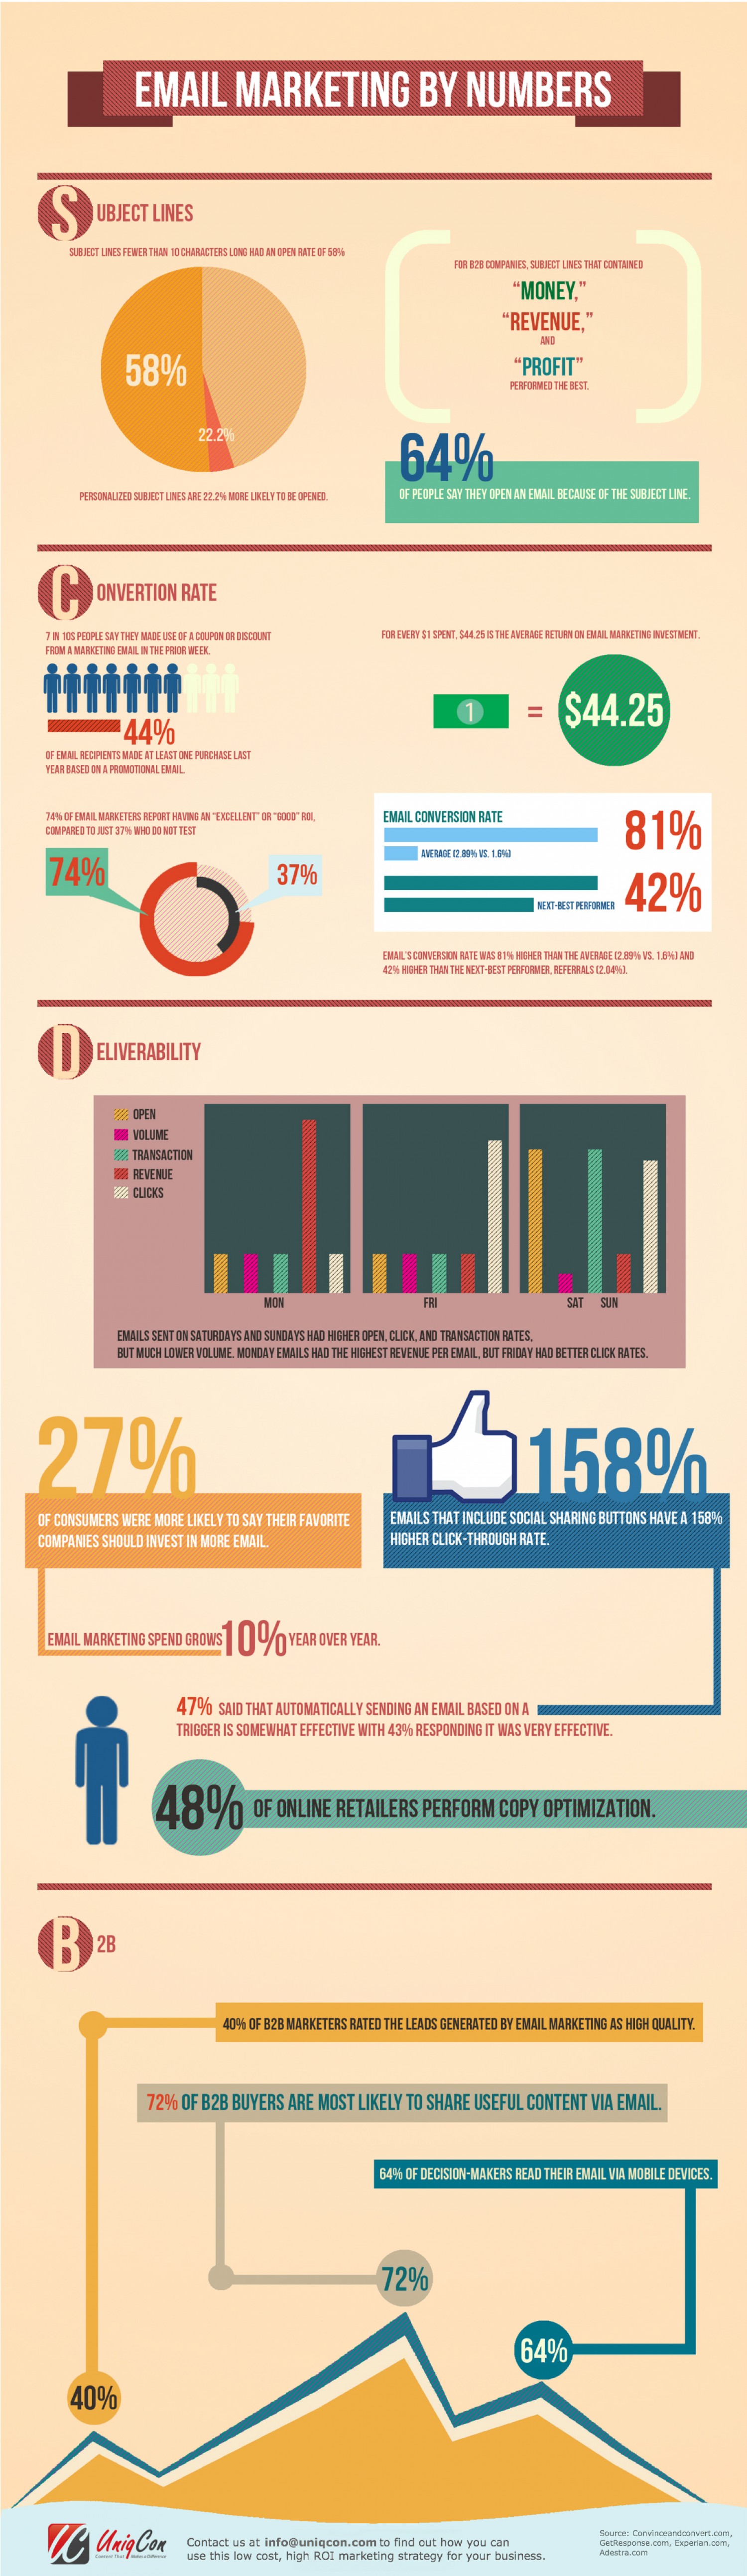  Email marketing by numbers